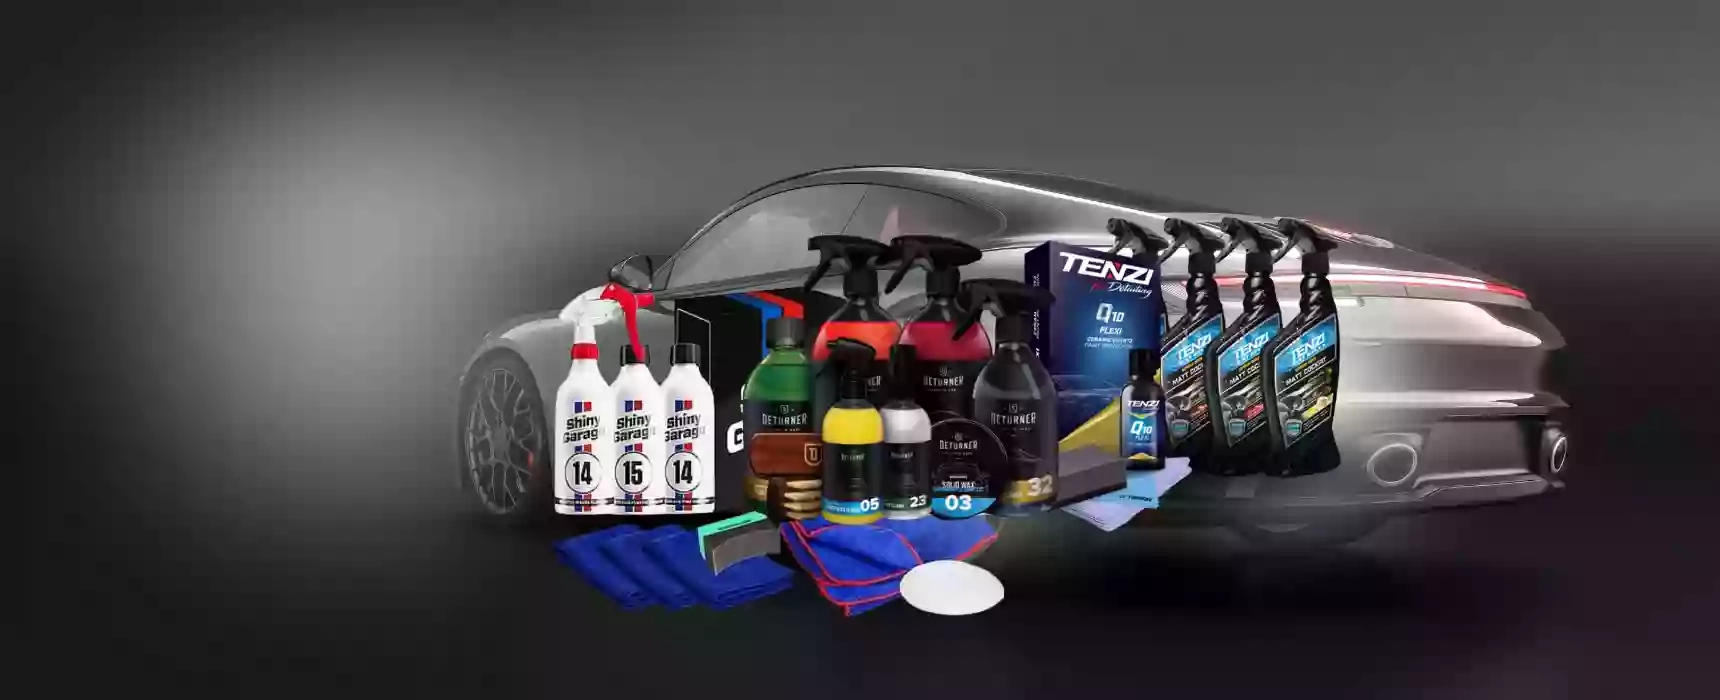 Rapro Car Care and Detailing supplies